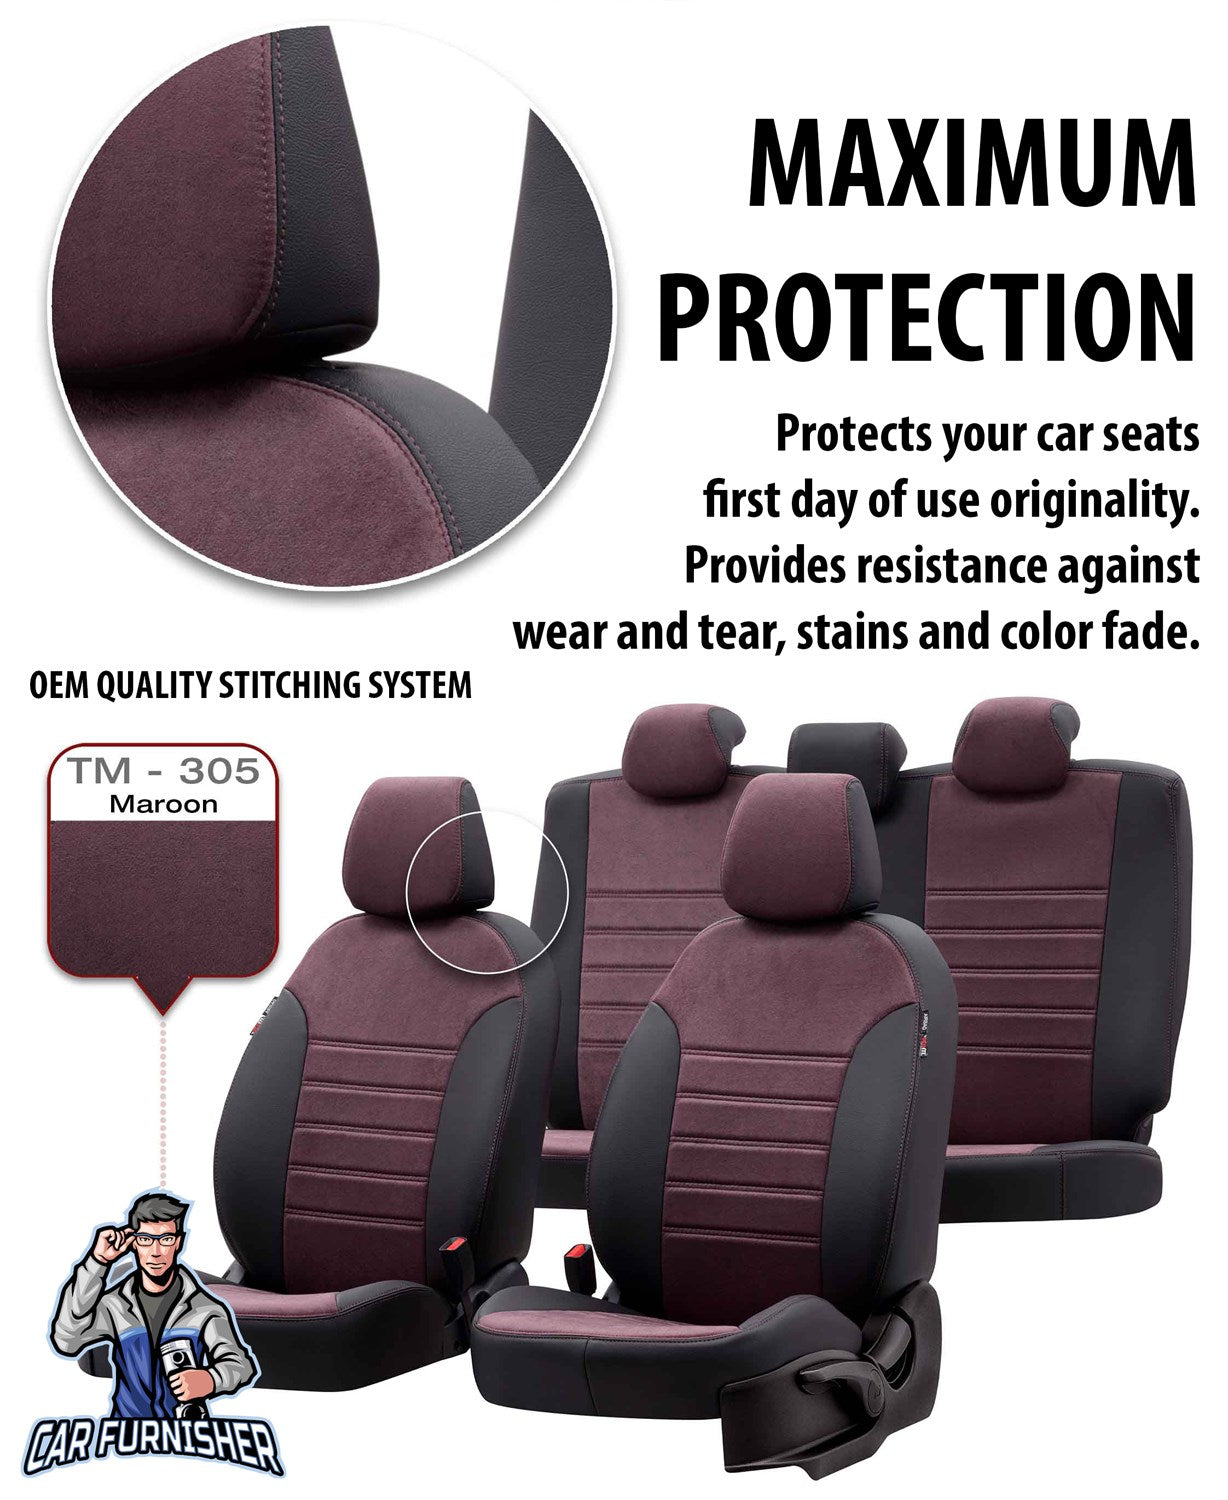 Tesla Model 3 Seat Cover Milano Suede Design Burgundy Leather & Suede Fabric